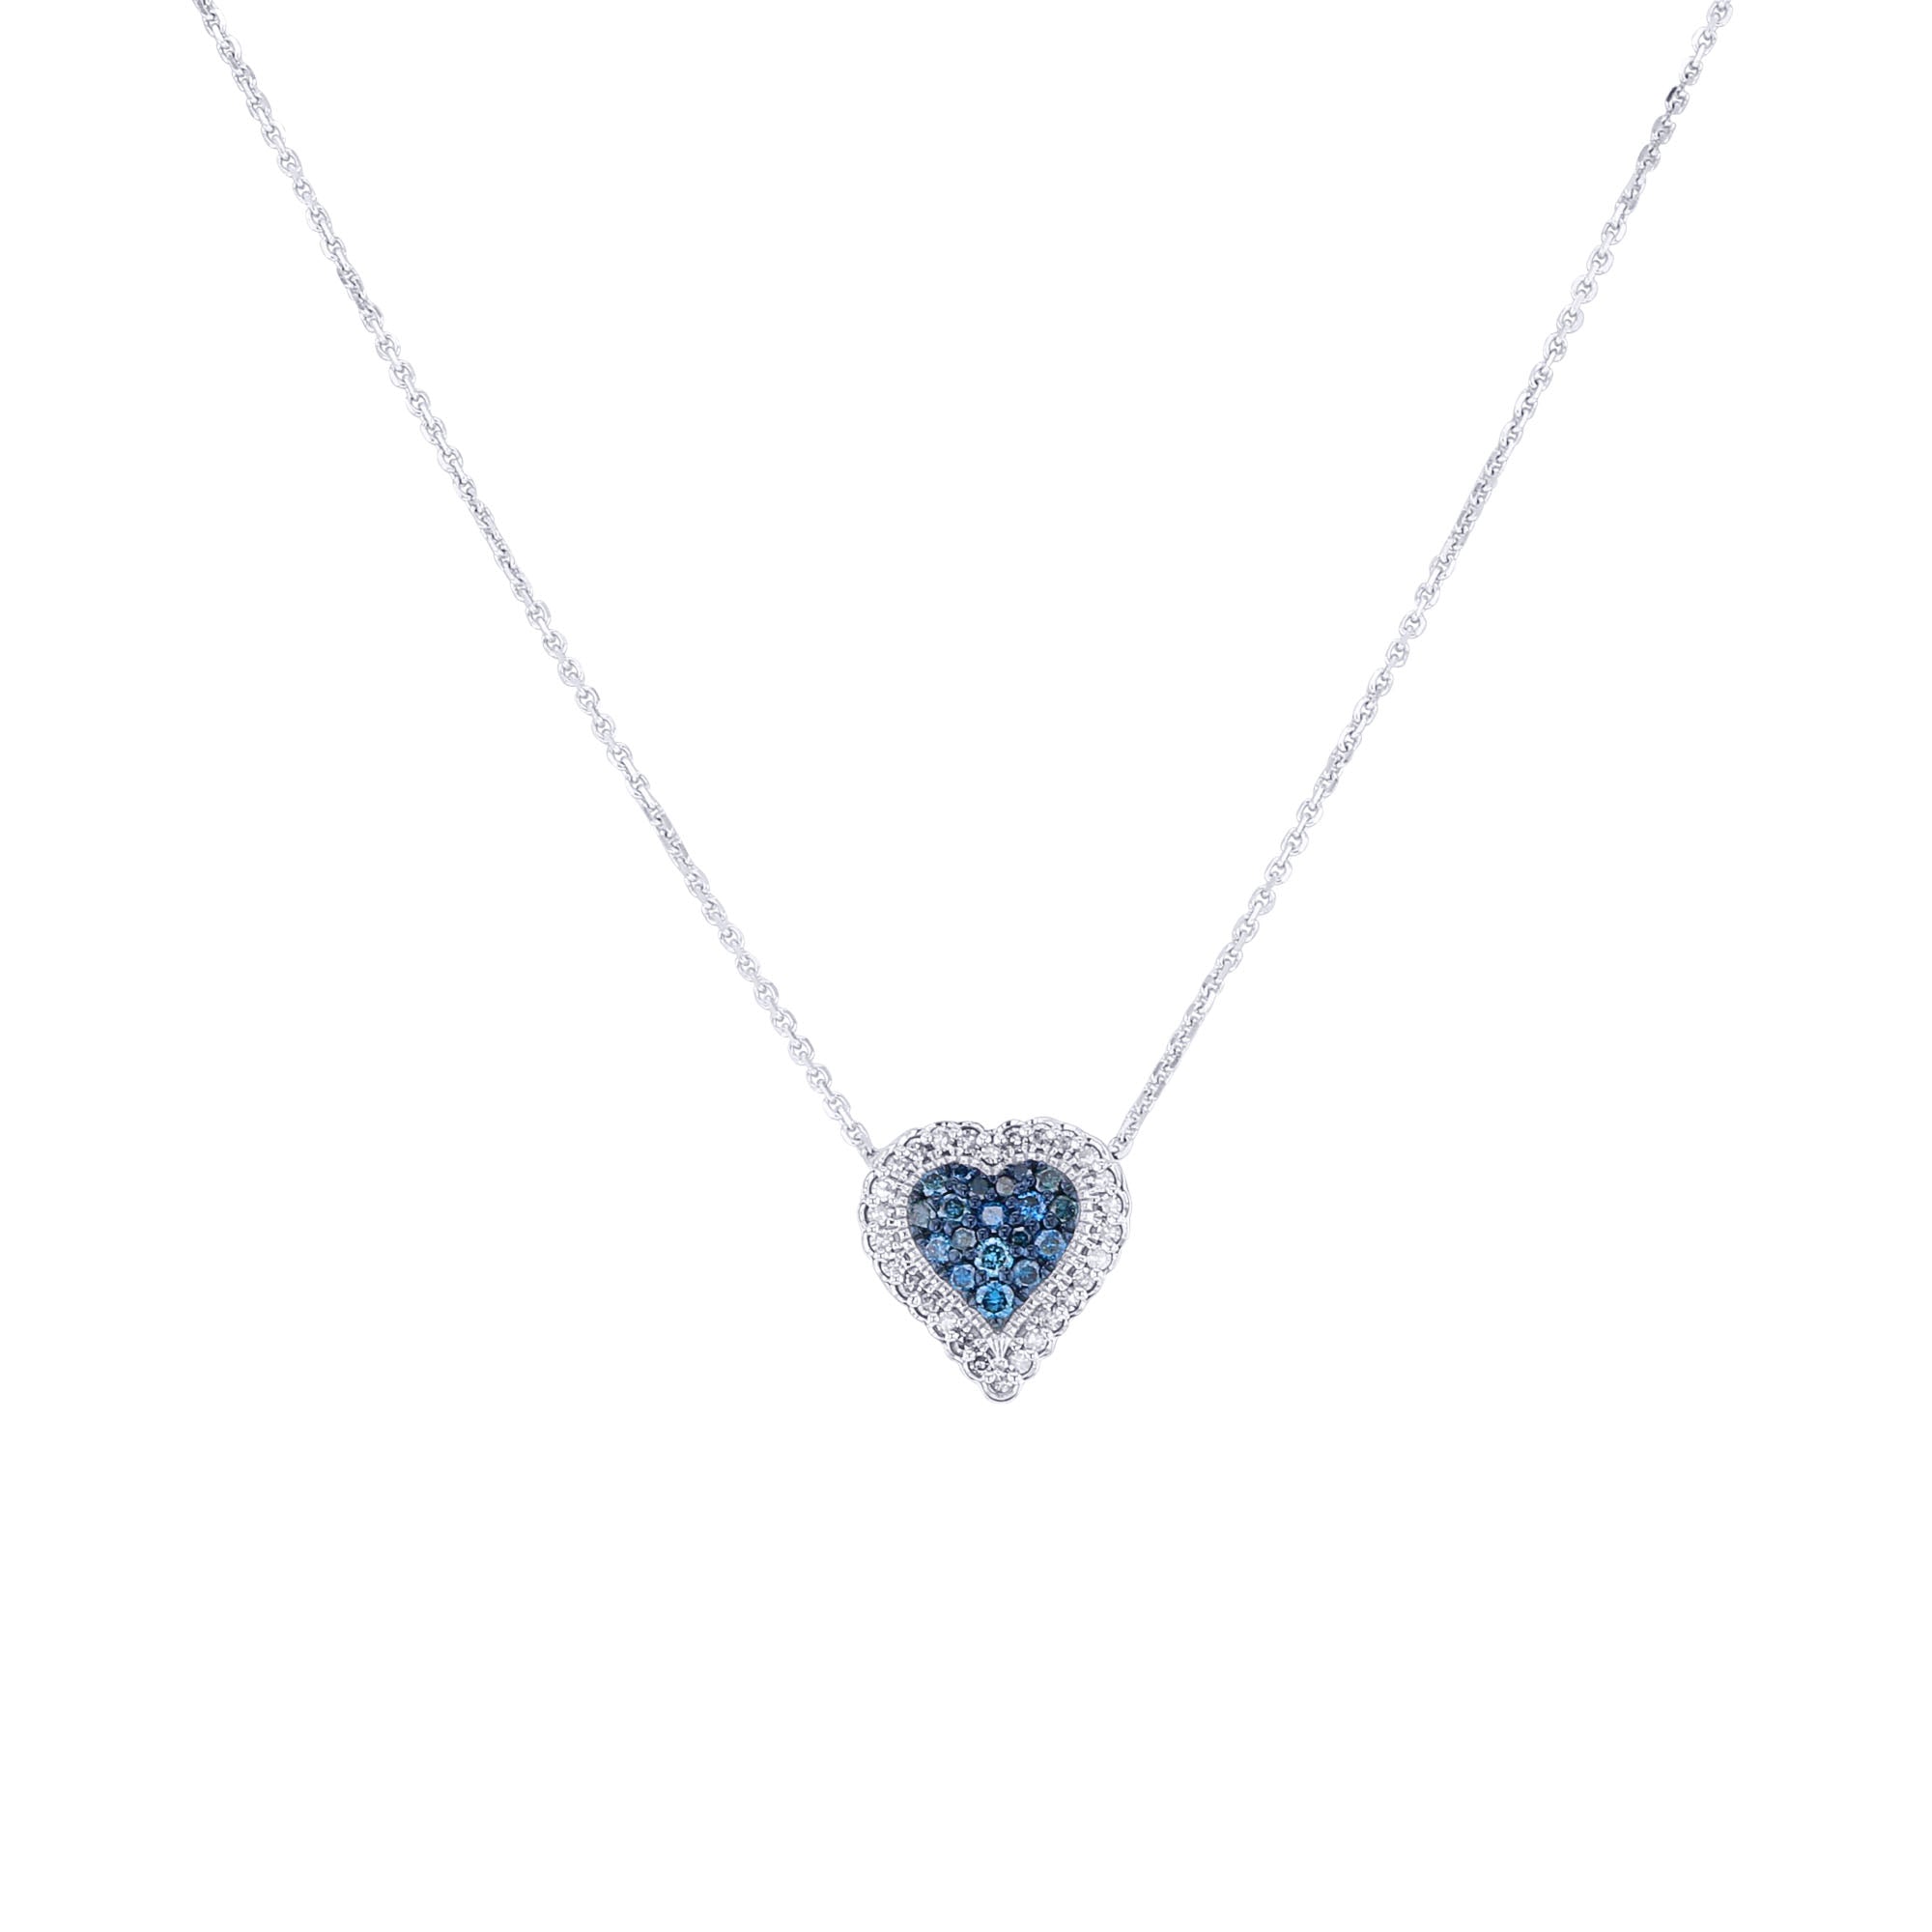 Full of Love Blue and White Diamond Necklace